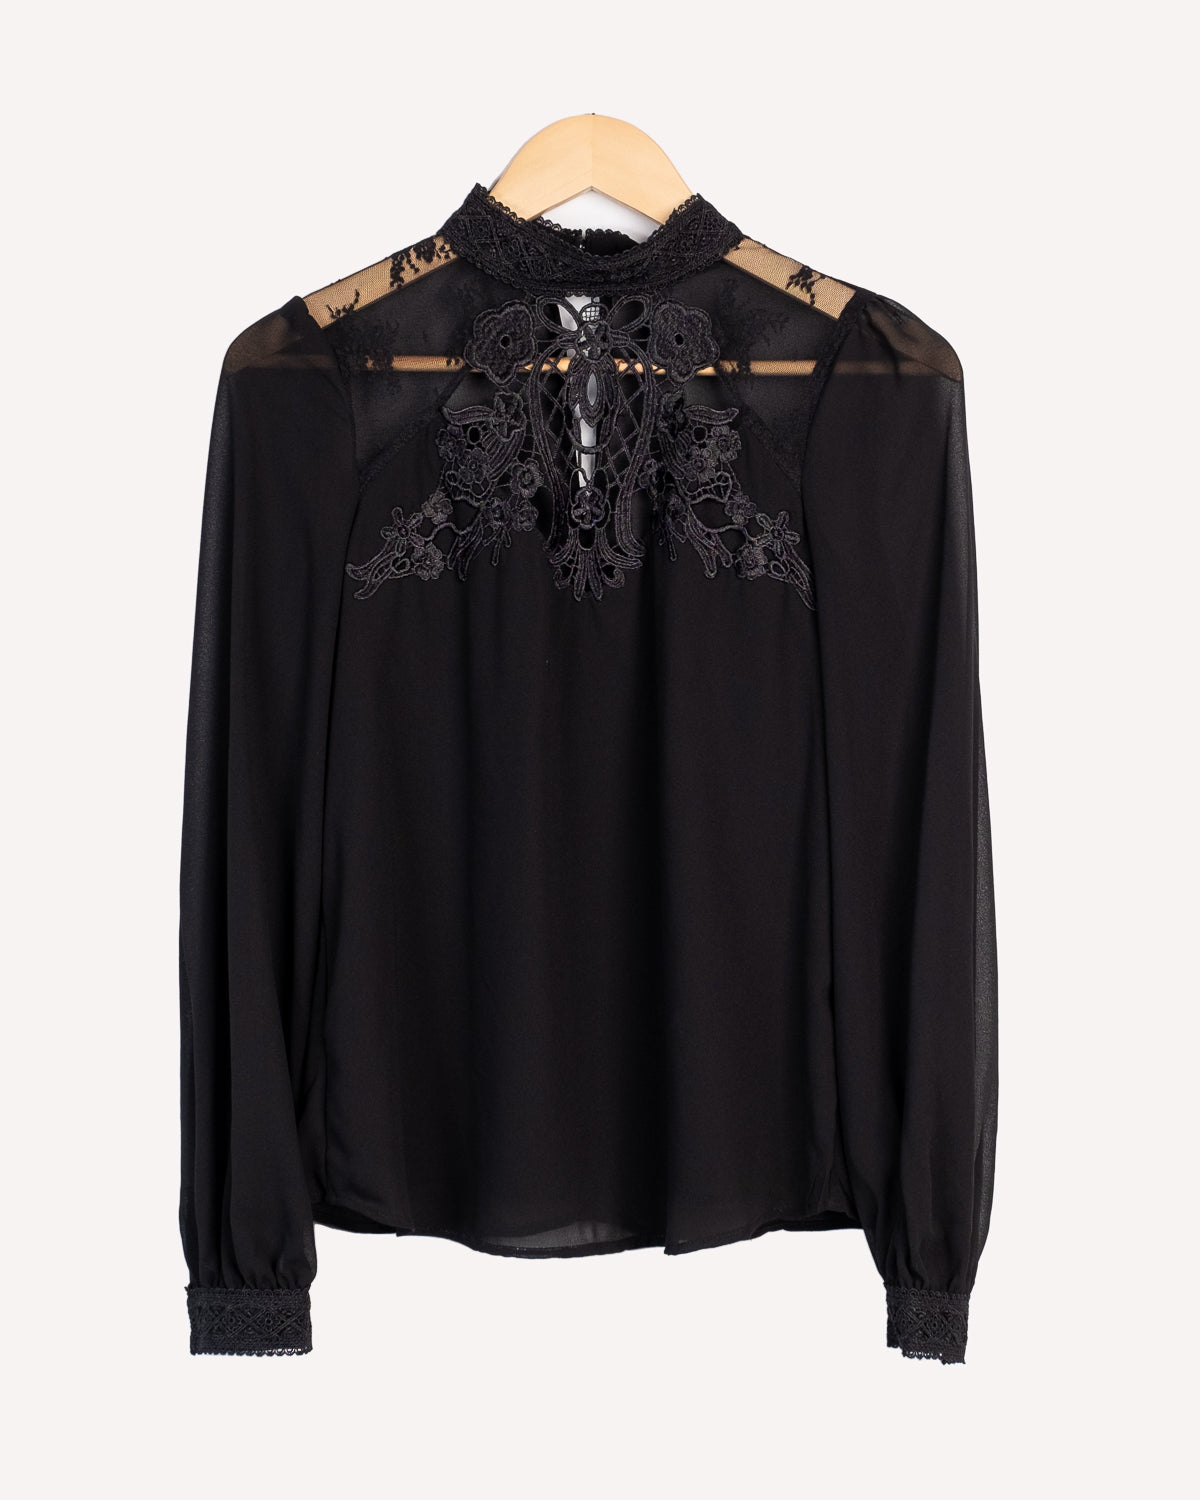 Women's Fashion Lace Front Long Sleeve Sexy See-through Blouse.